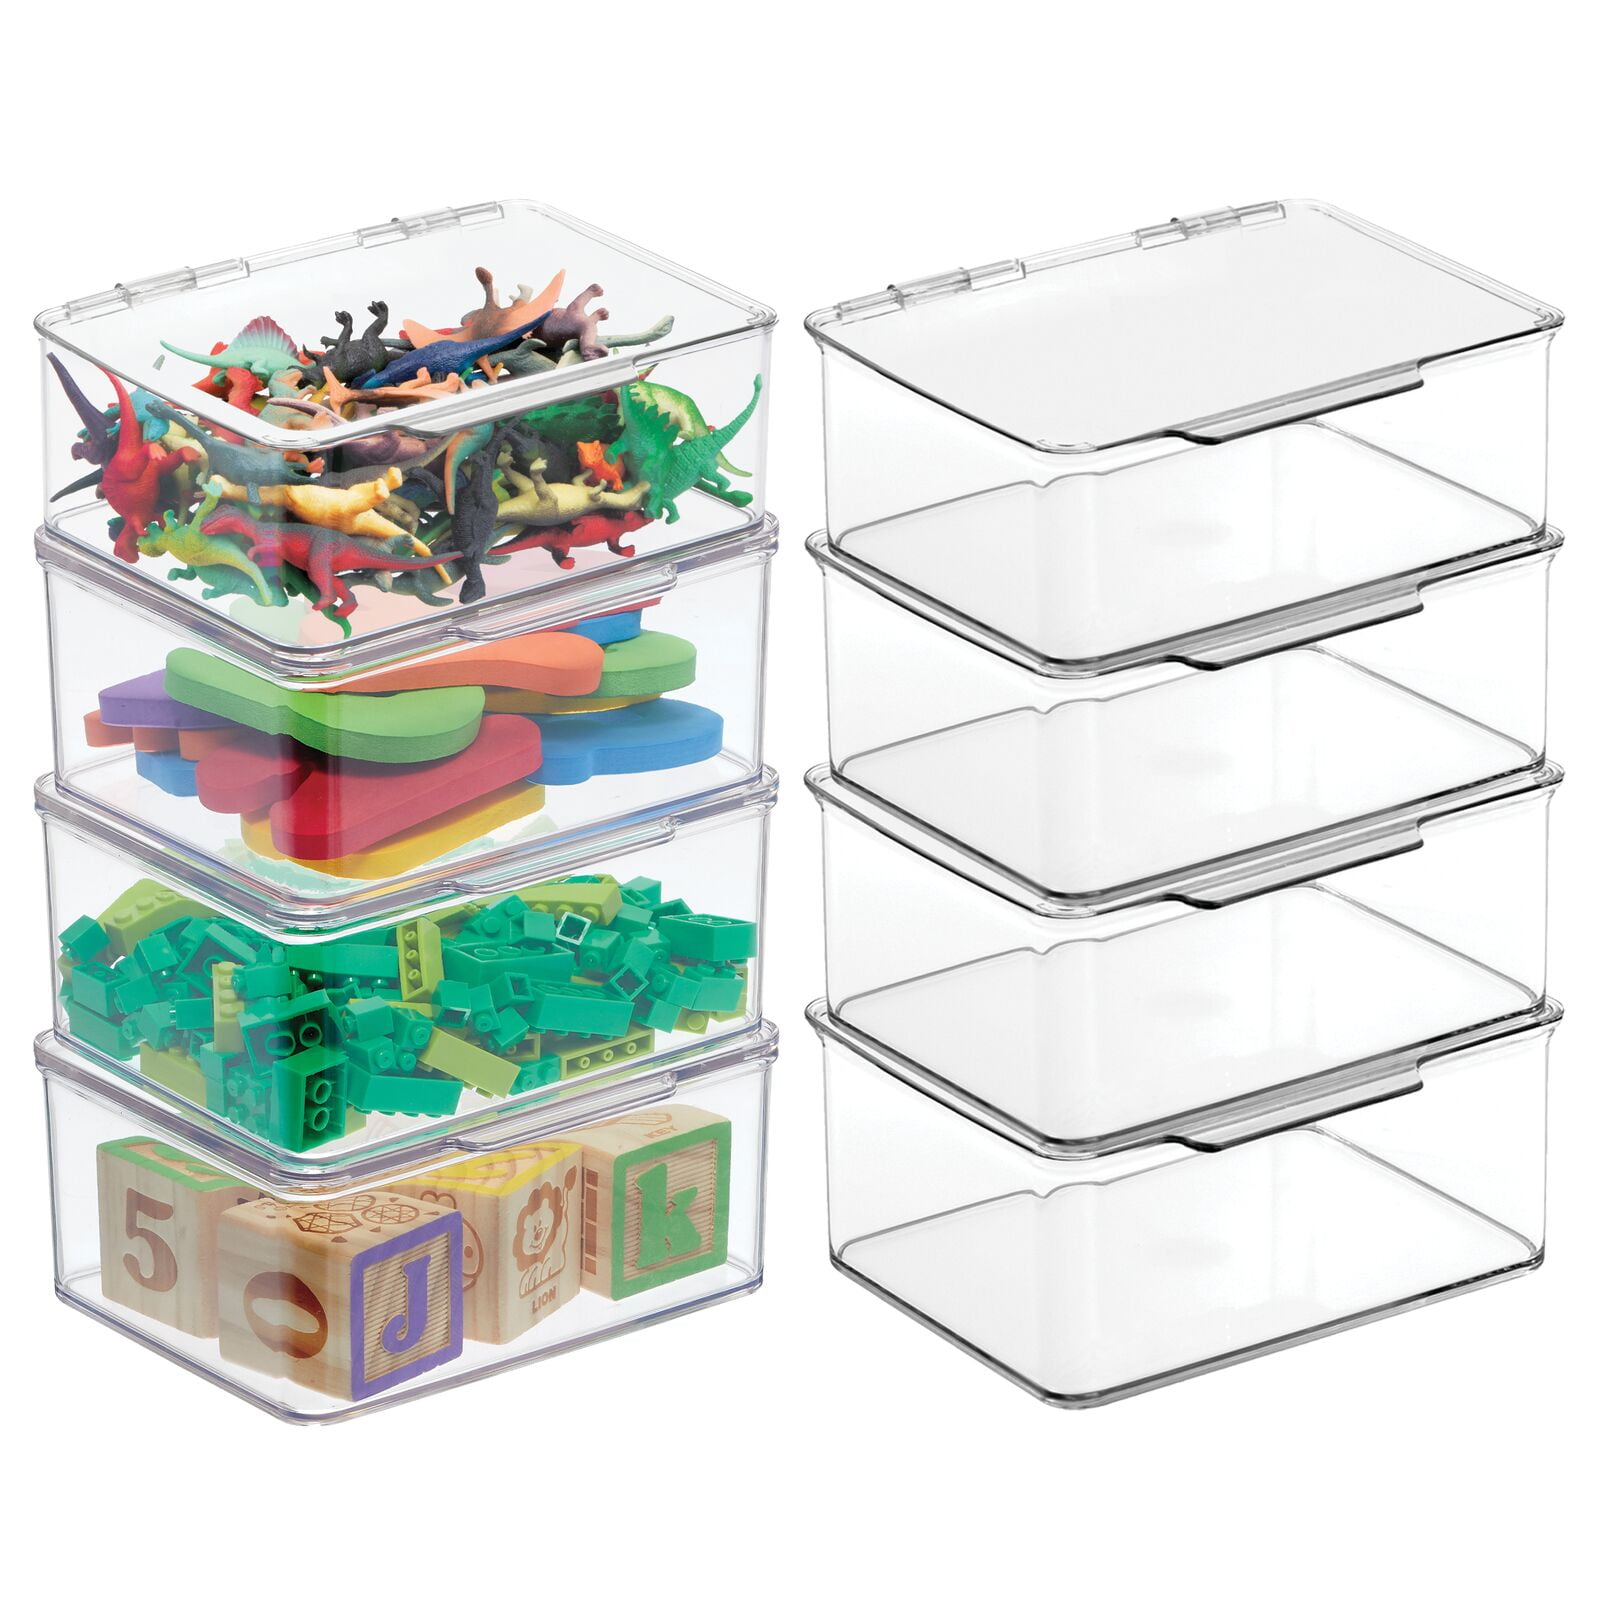  Goodma 12 Pieces Mini Rectangular Plastic Boxes Empty Storage  Organizer Containers with Hinged Lids for Small Items and Other Craft  Projects (Pink, 3.3 x 2.2 x 1 inch) : Arts, Crafts & Sewing